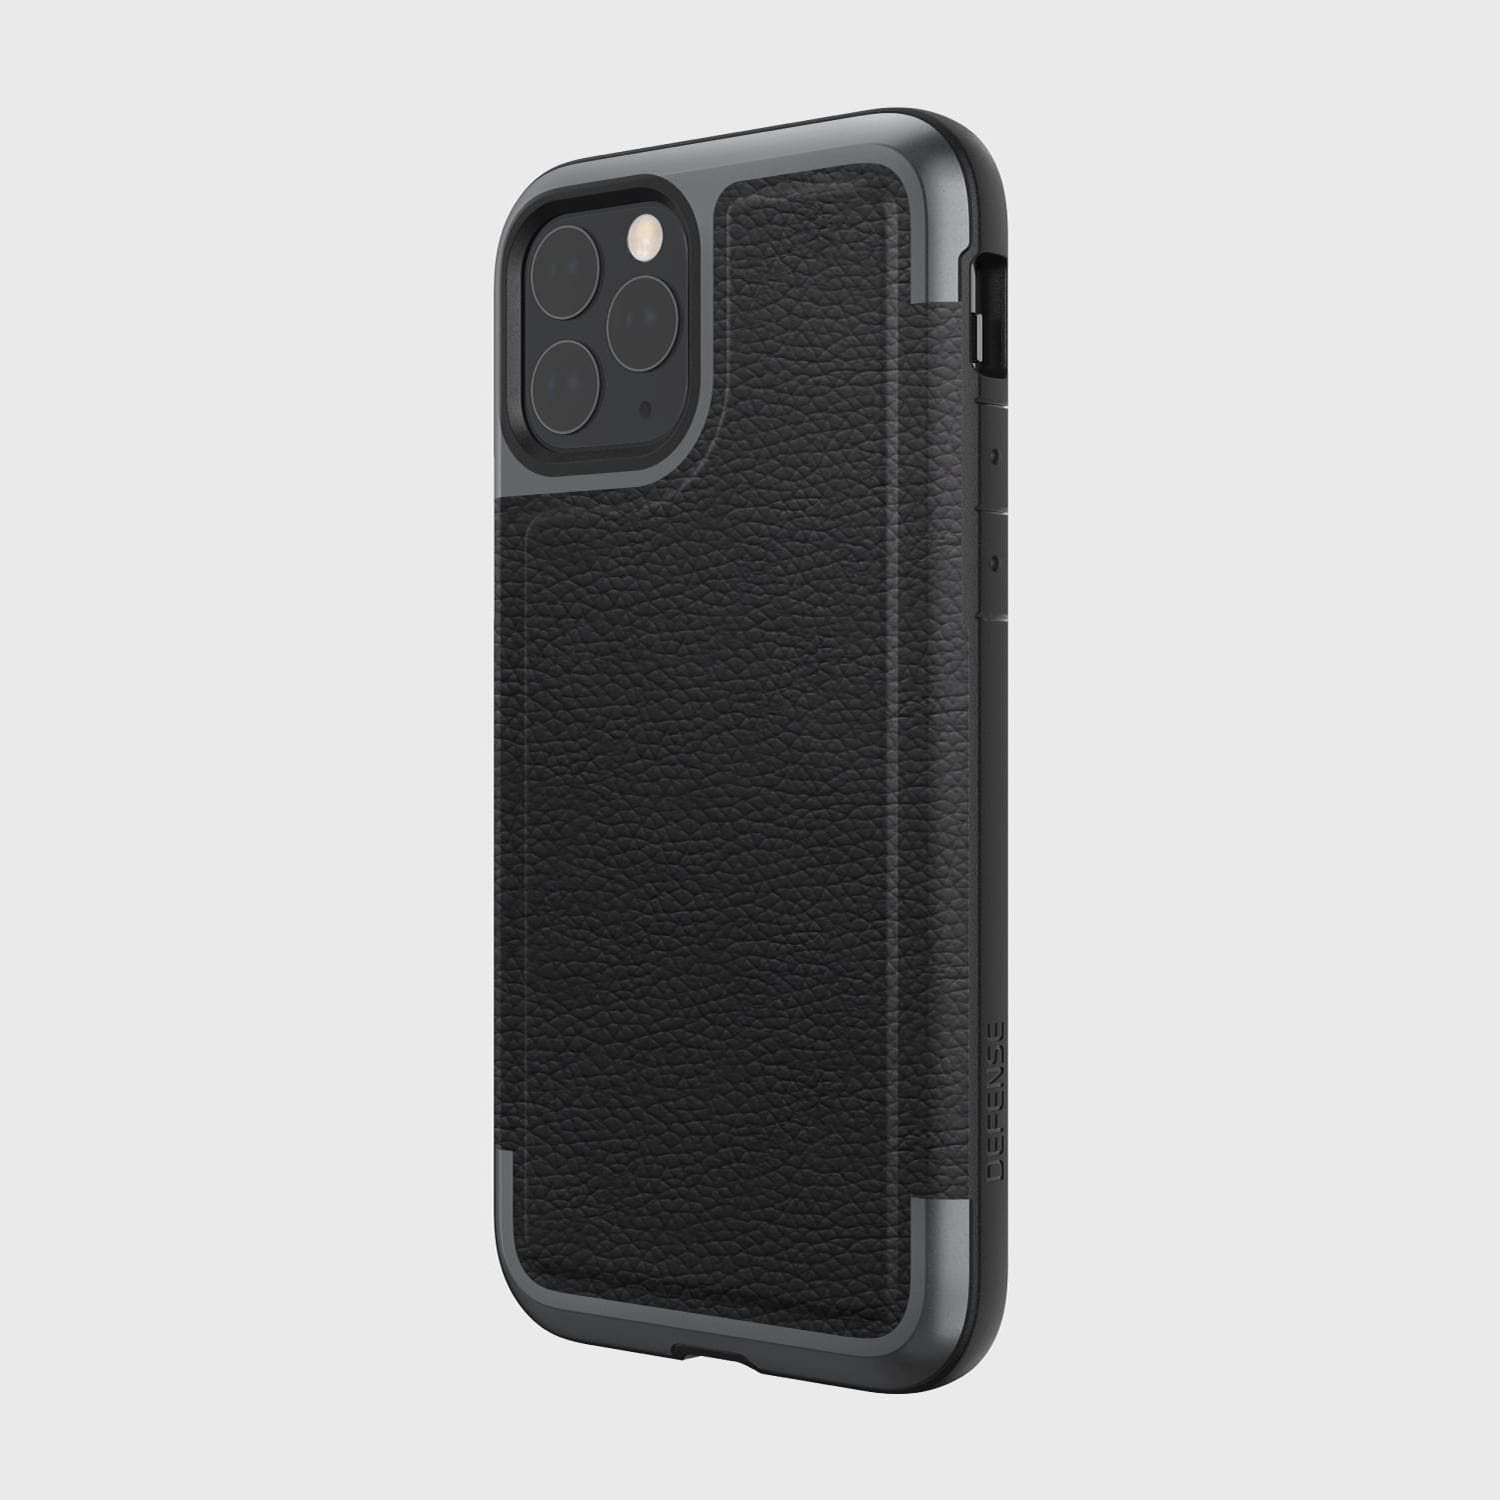 The back view of an Raptic iPhone 11 Case - PRIME in black, providing drop protection.